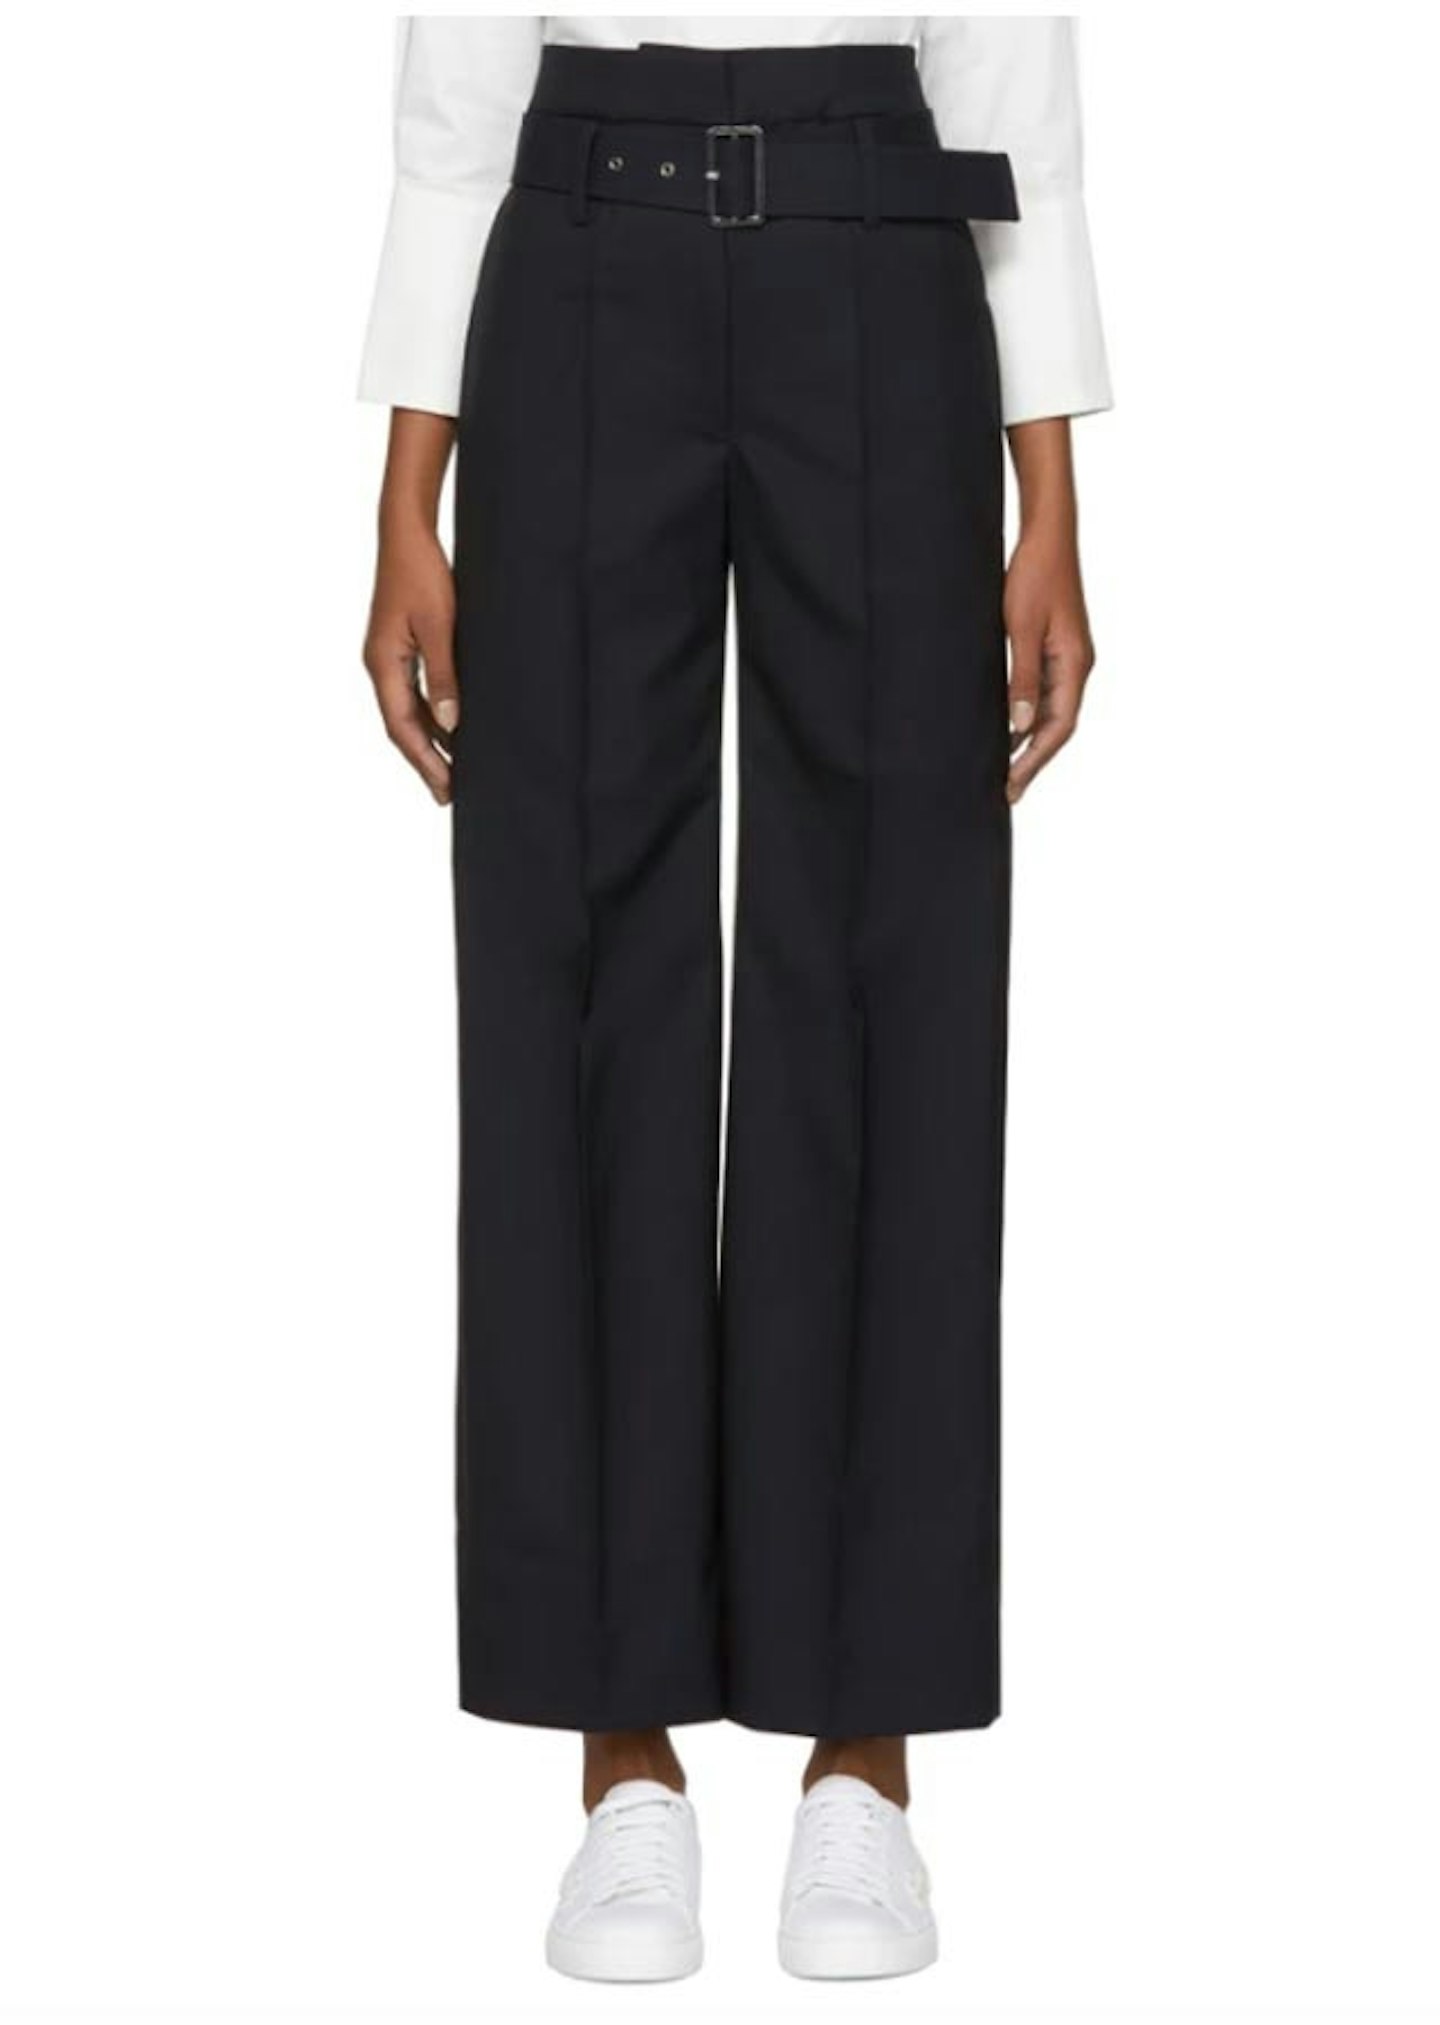 SSense Paperbag trousers